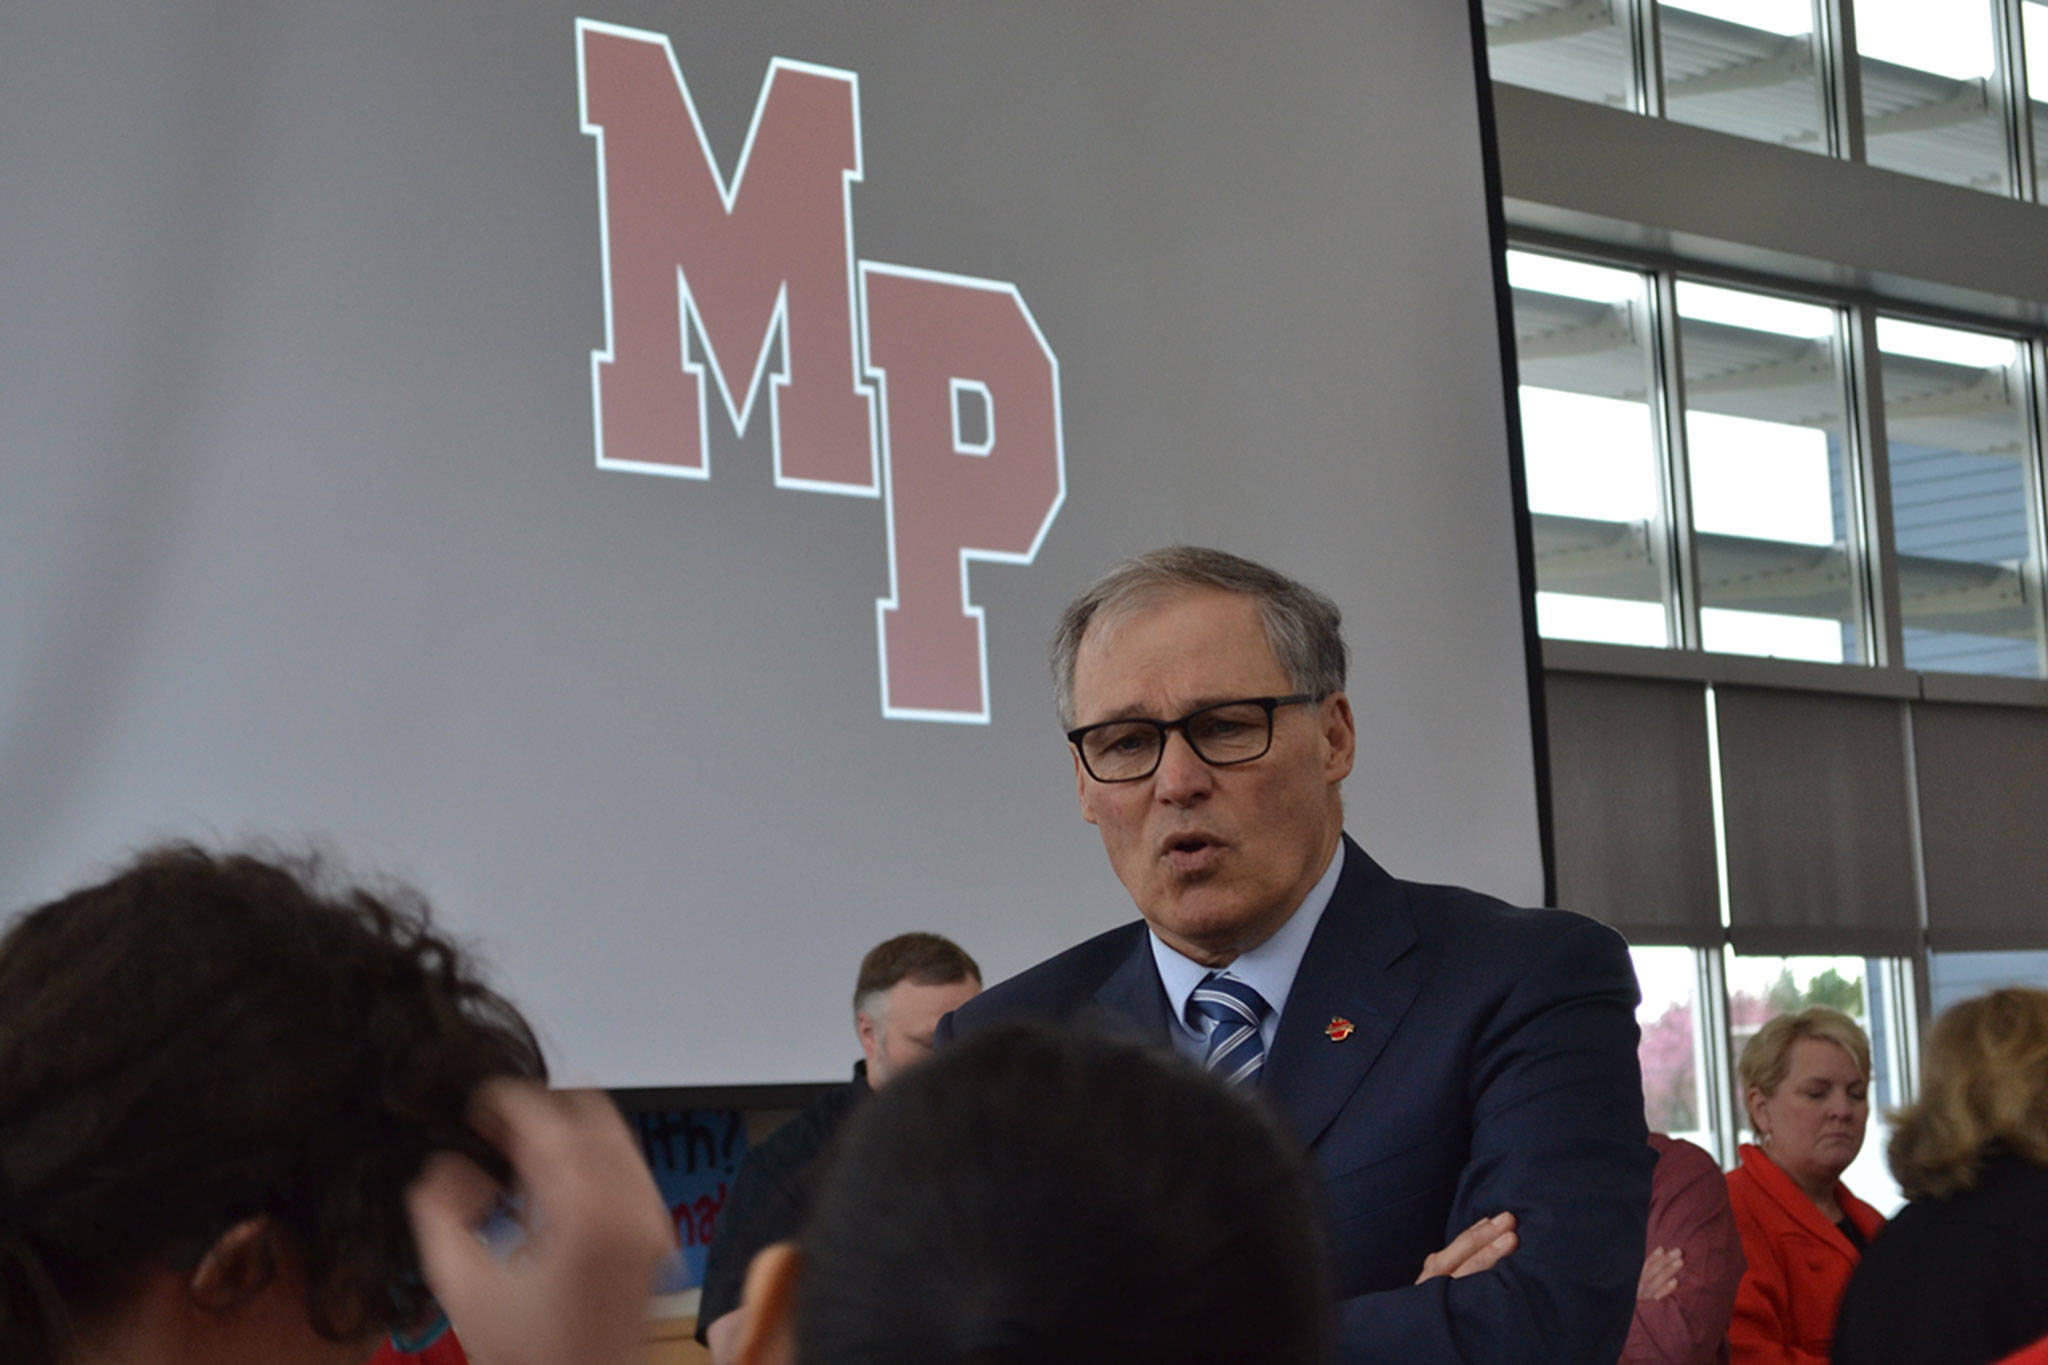 Inslee talks about mental health needs of students statewide in visit to M-P (slide show)